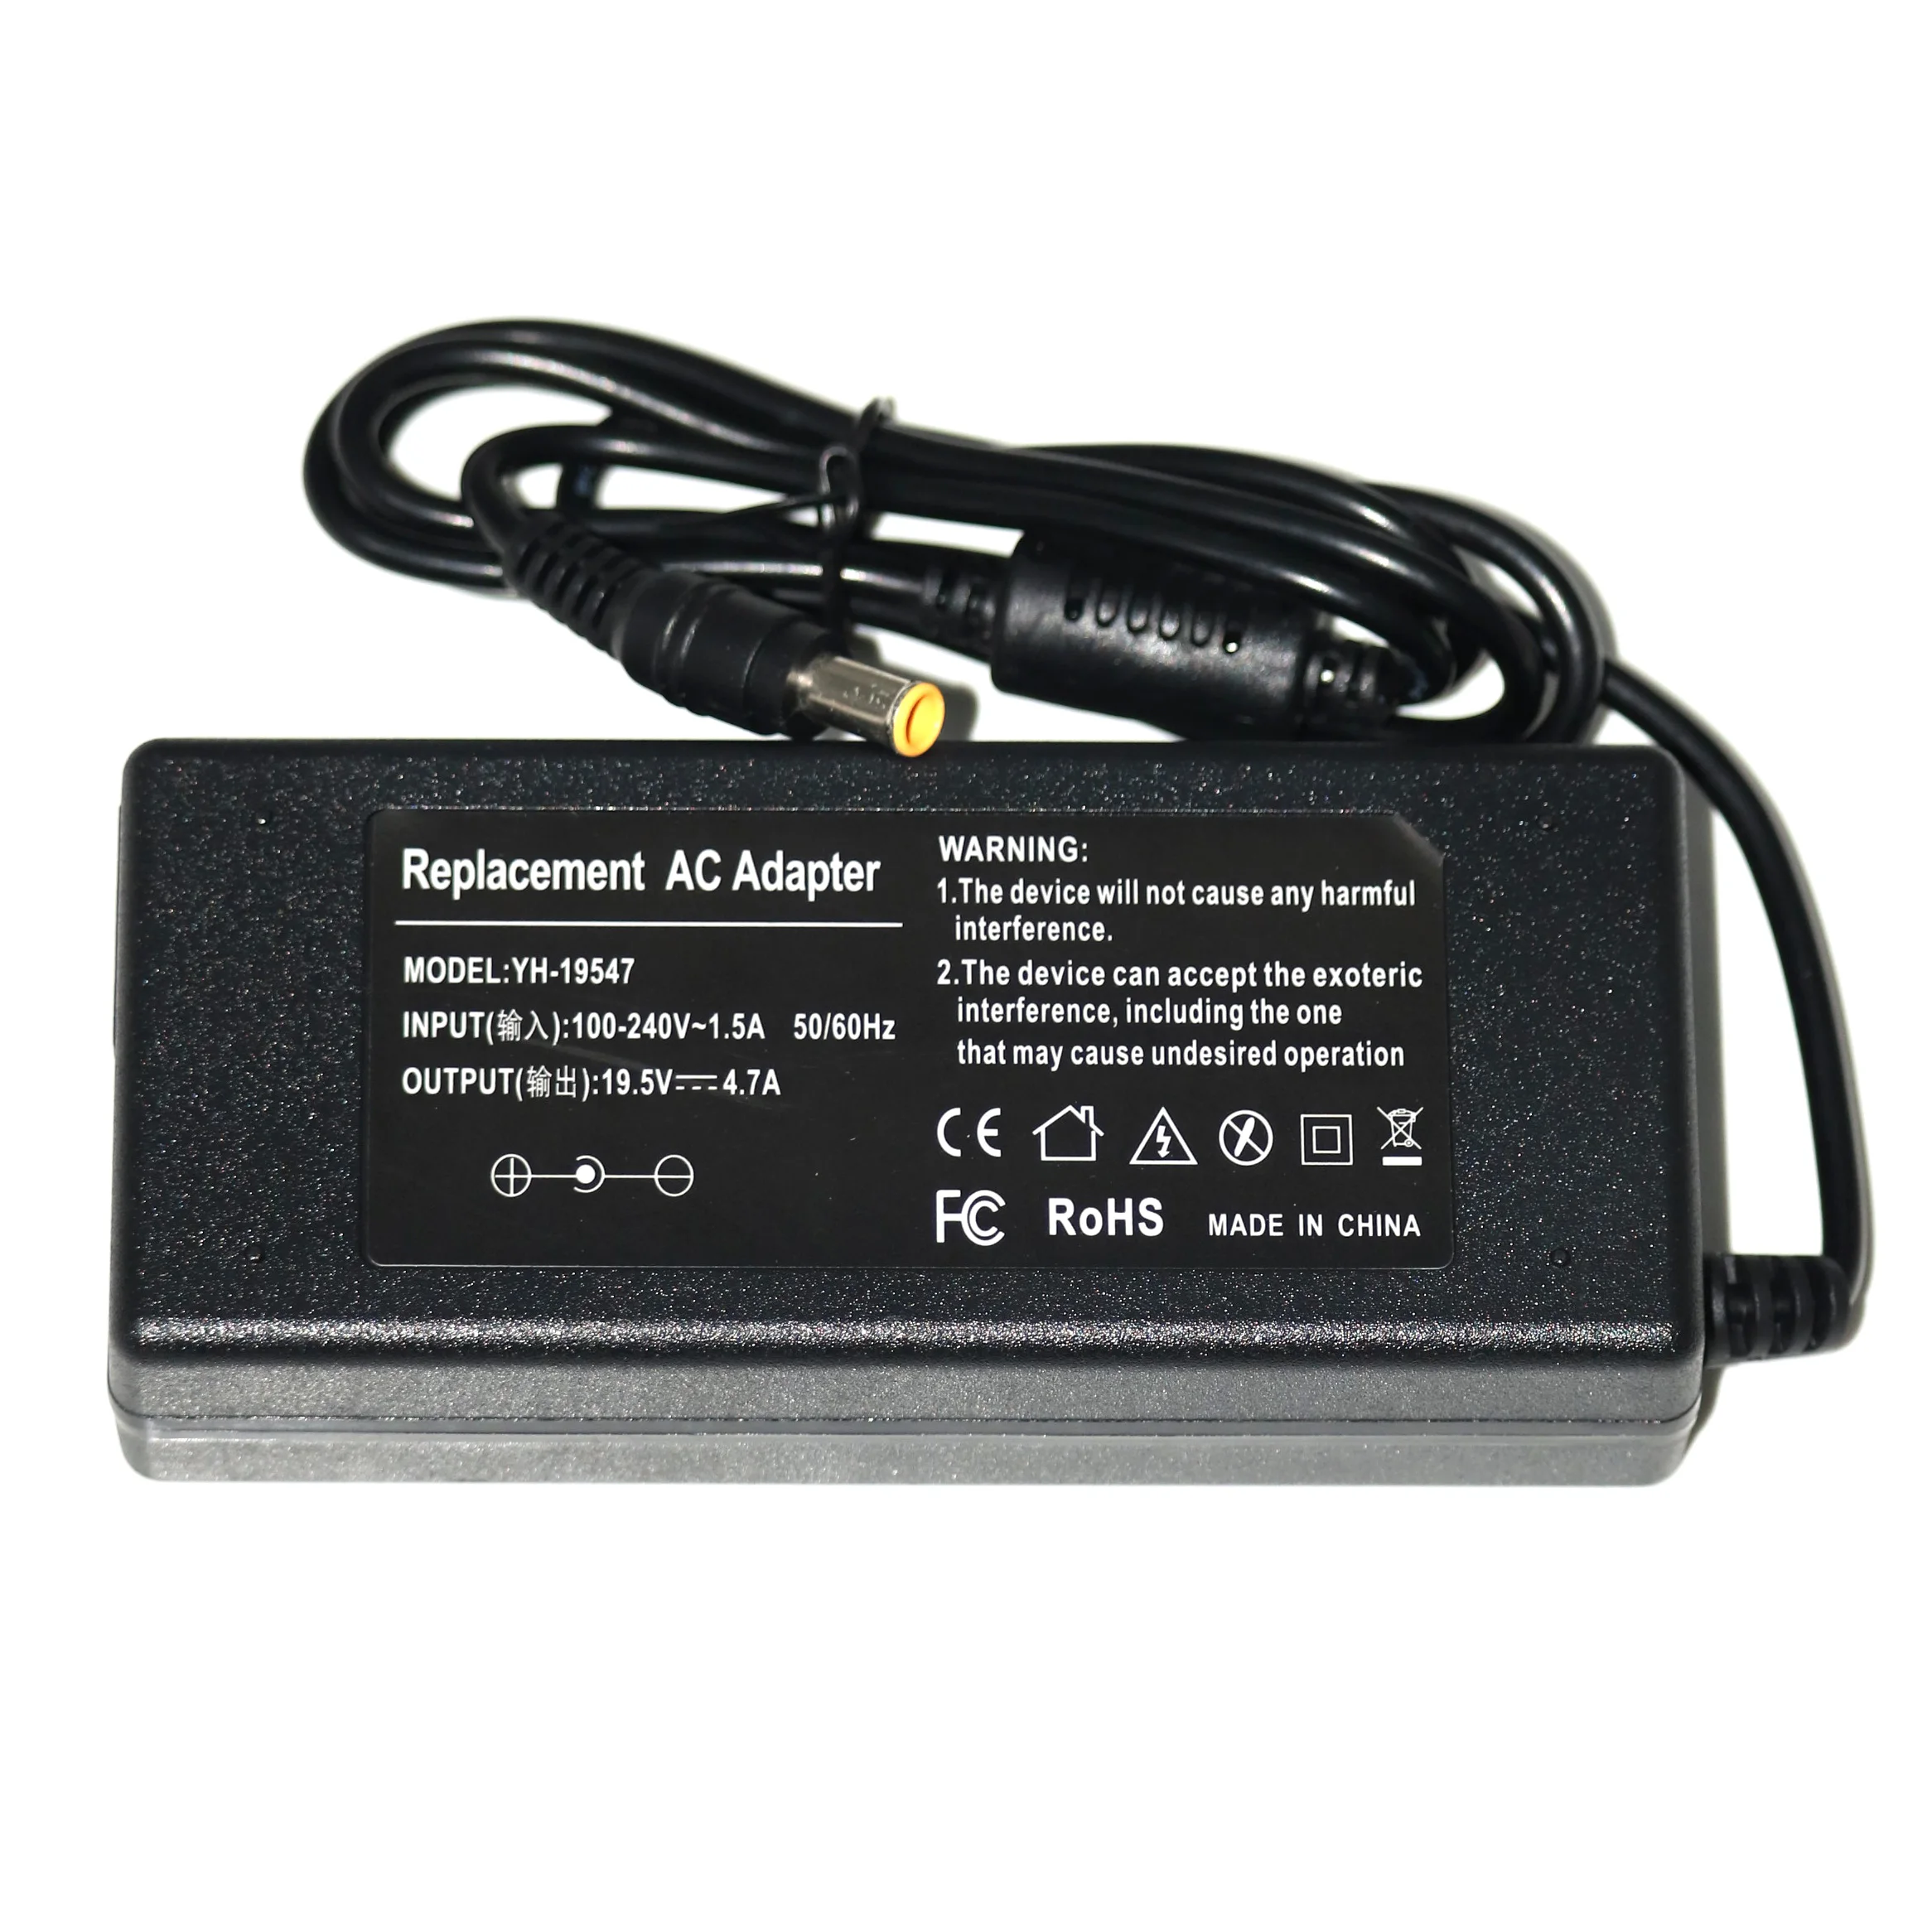 

19.5V 4.7A 90W 6.5*4.4mm Charger AC laptop adapter For Sony Vaio PCG-61511L VGP-AC19V20 VGP-AC19V29 VGP-AC19V31 VGP-AC19V32 33